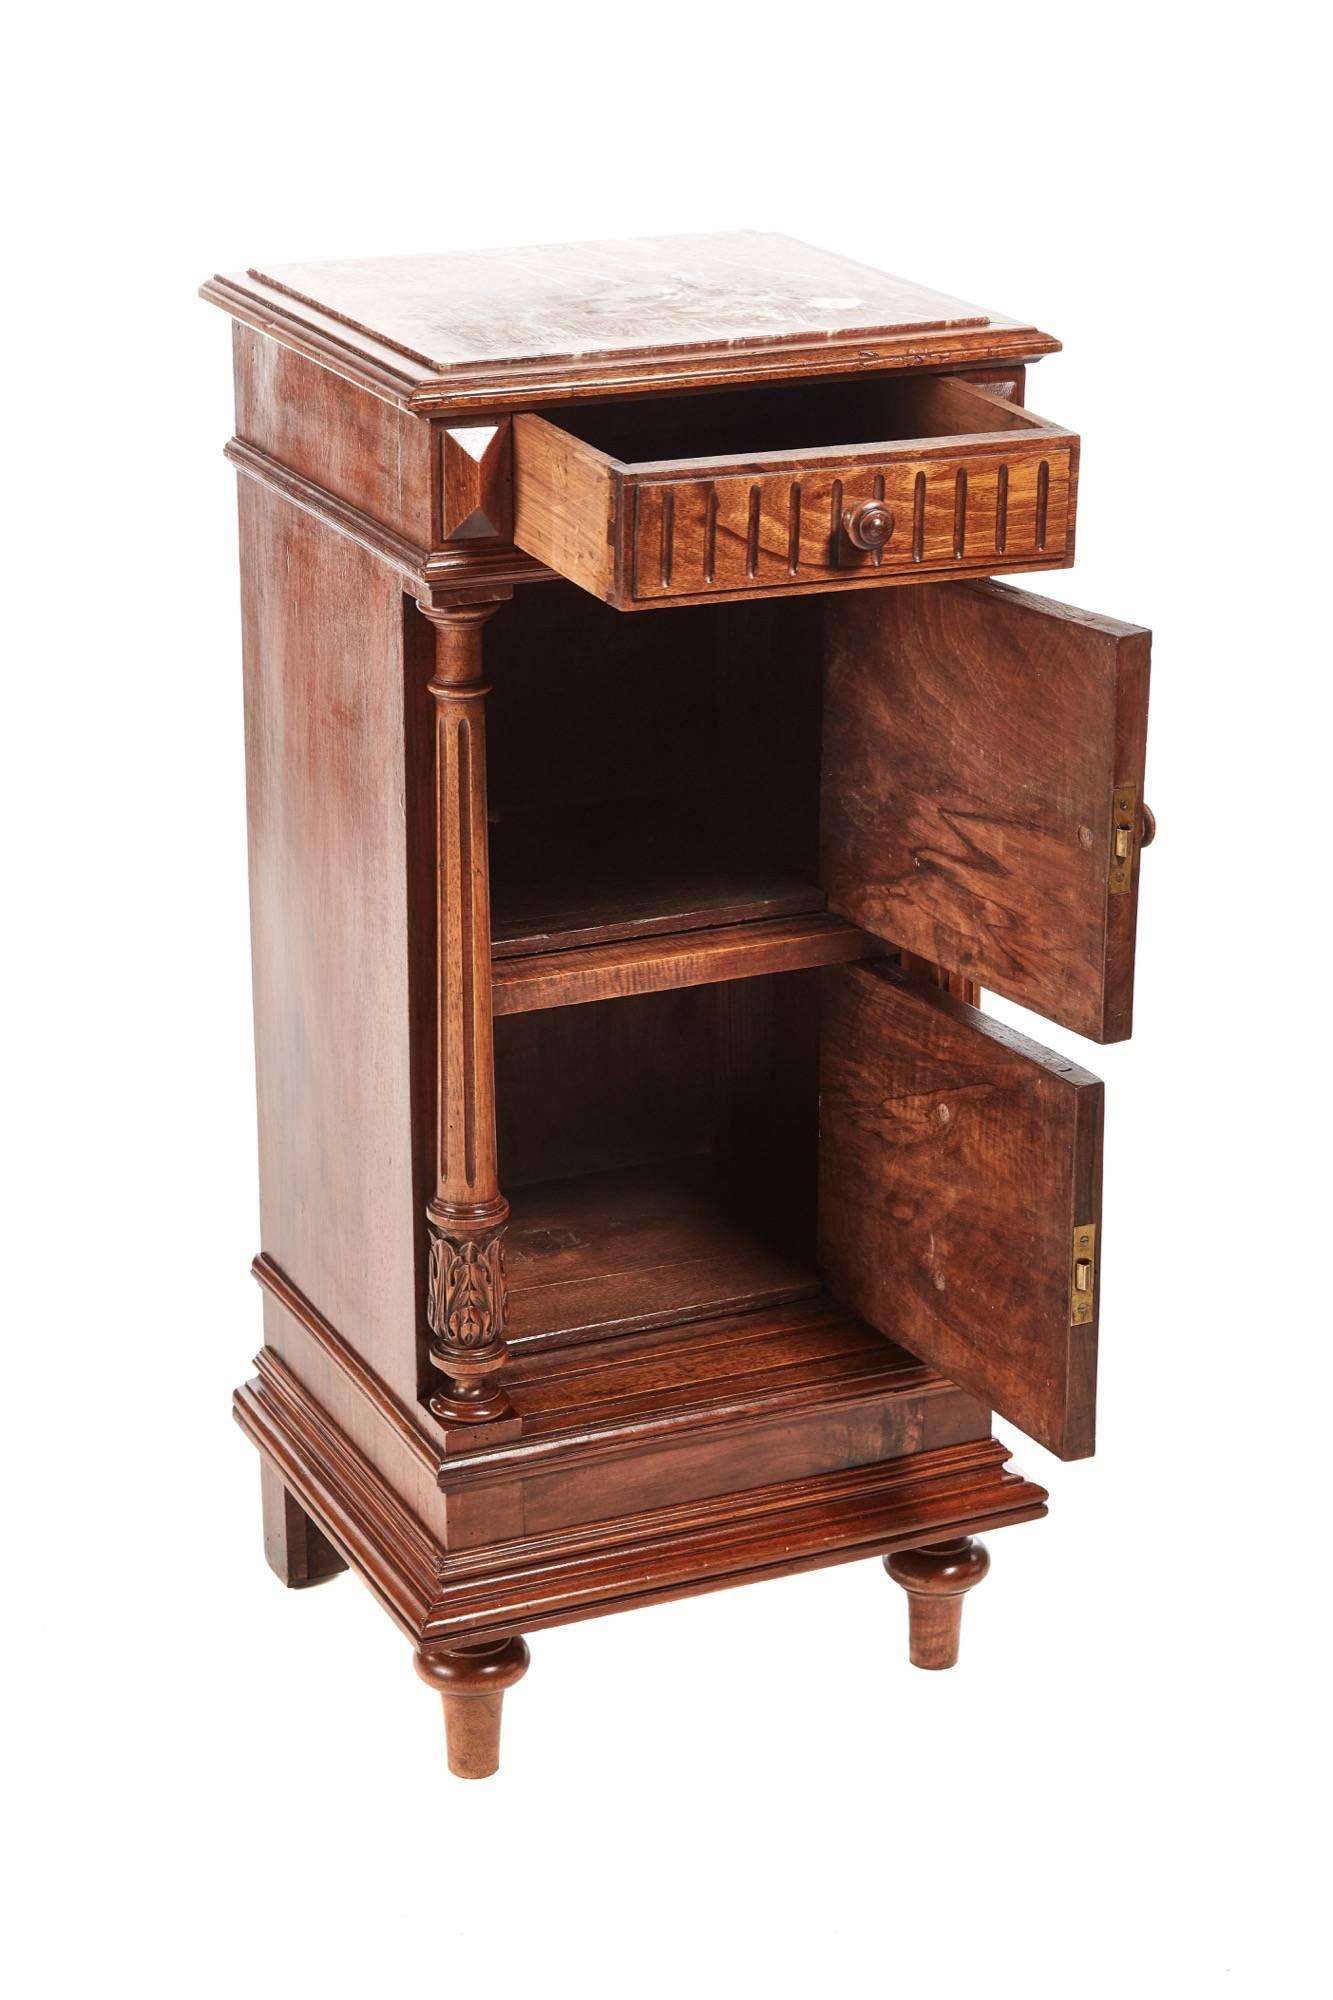 Unusual French walnut bedside cabinet with a marble top drawer to the frieze two cupboard doors lovely carved walnut columns shaped plinth standing on turned legs to the front,
Lovely color and condition
Measures: 17